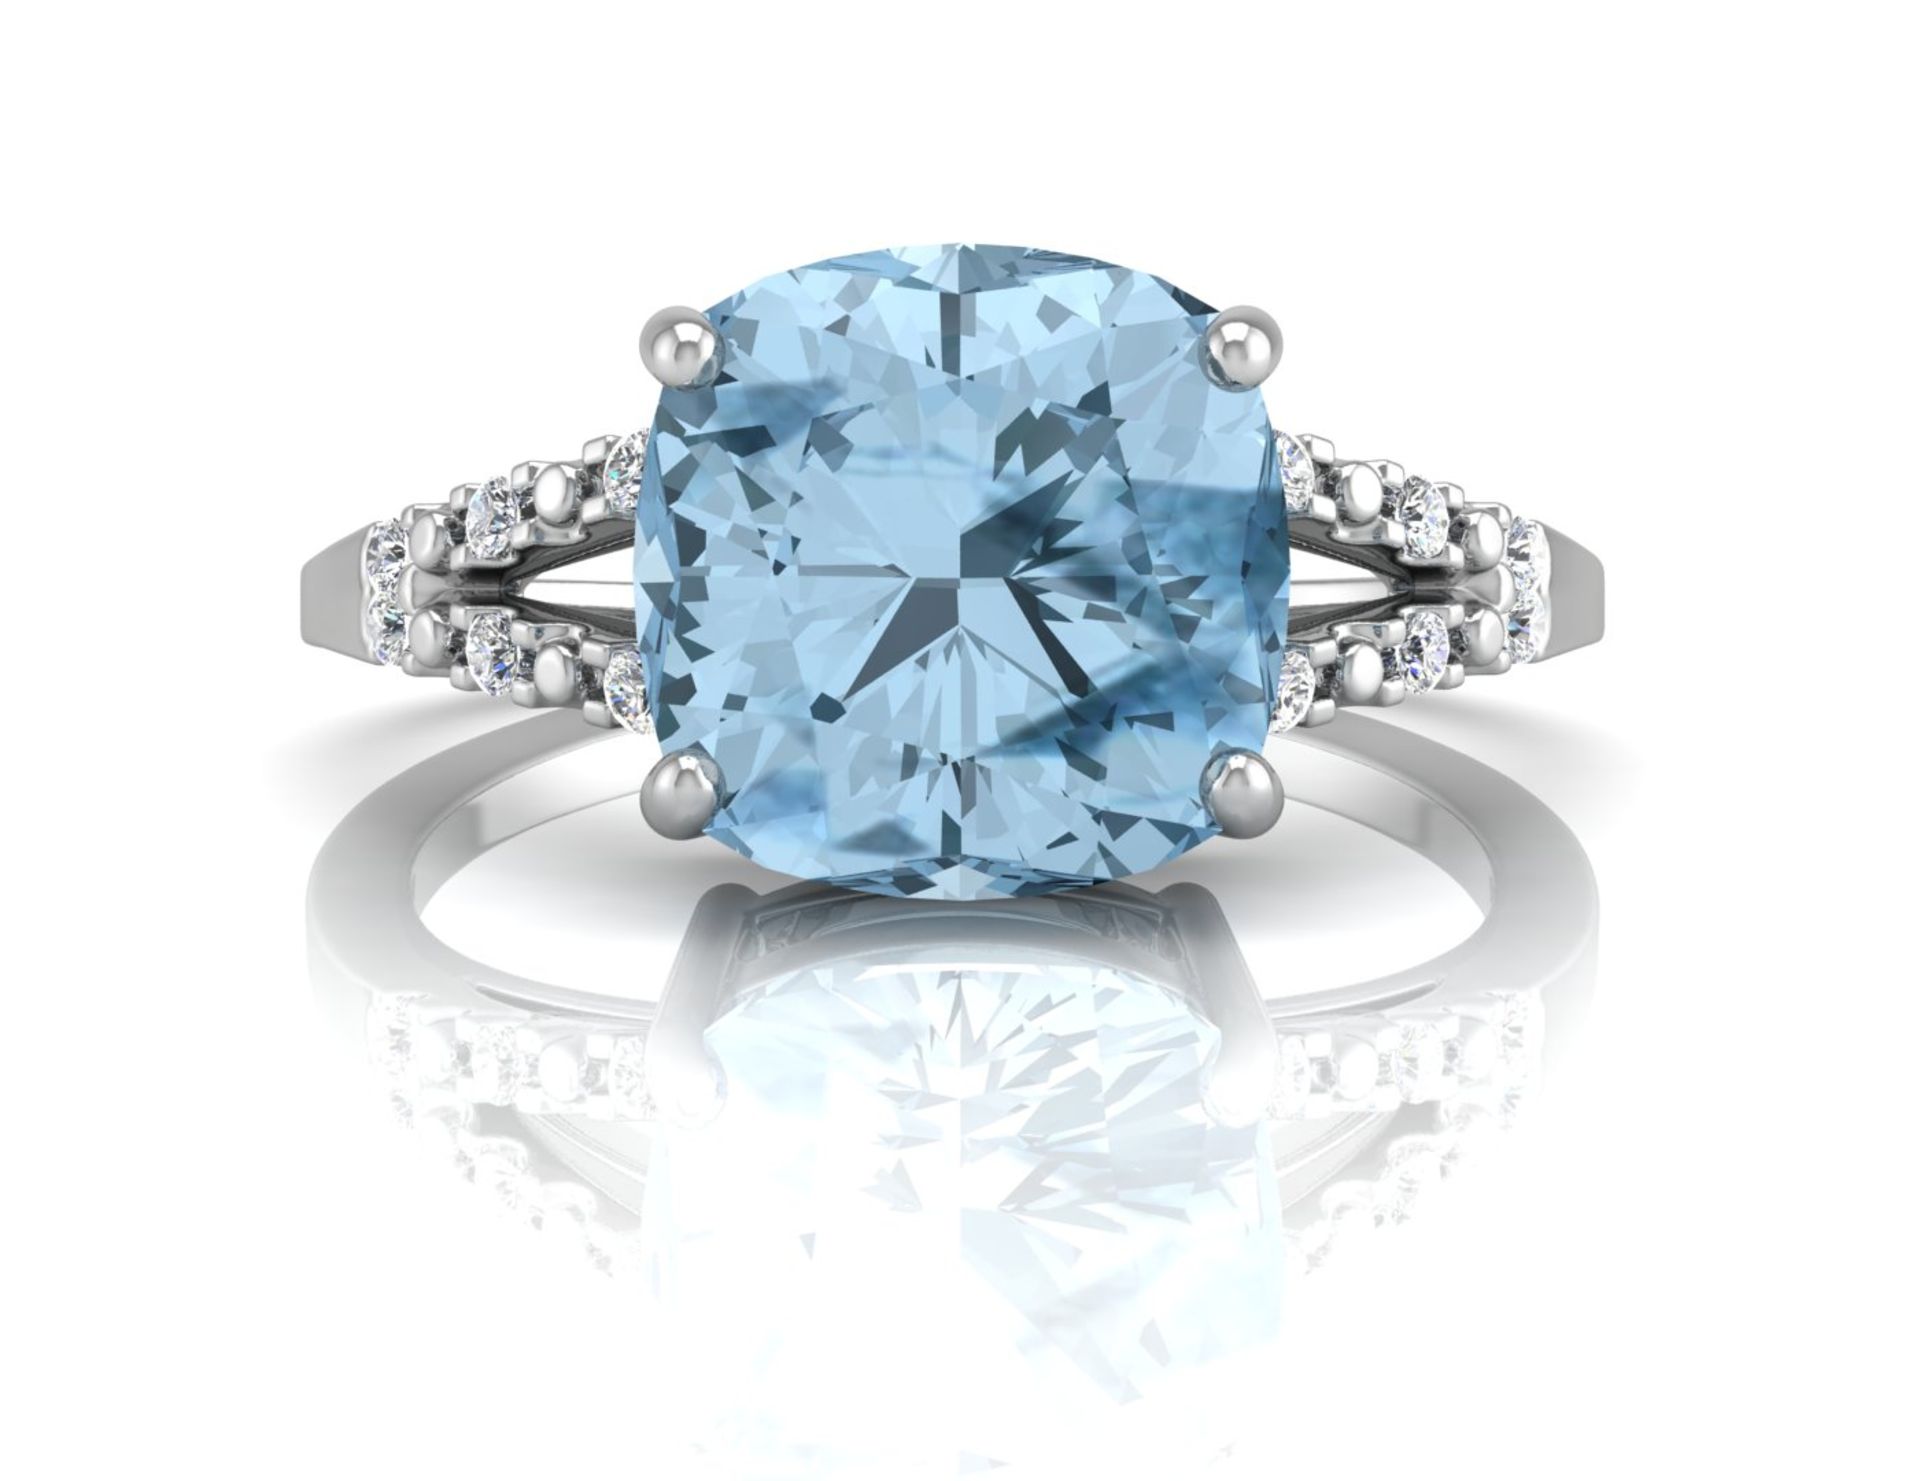 UNUSED - Certified by GIE 9ct White Gold Cushion Cut Blue Topaz With Diamond Set Shoulders Ring 0.06 - Image 4 of 5